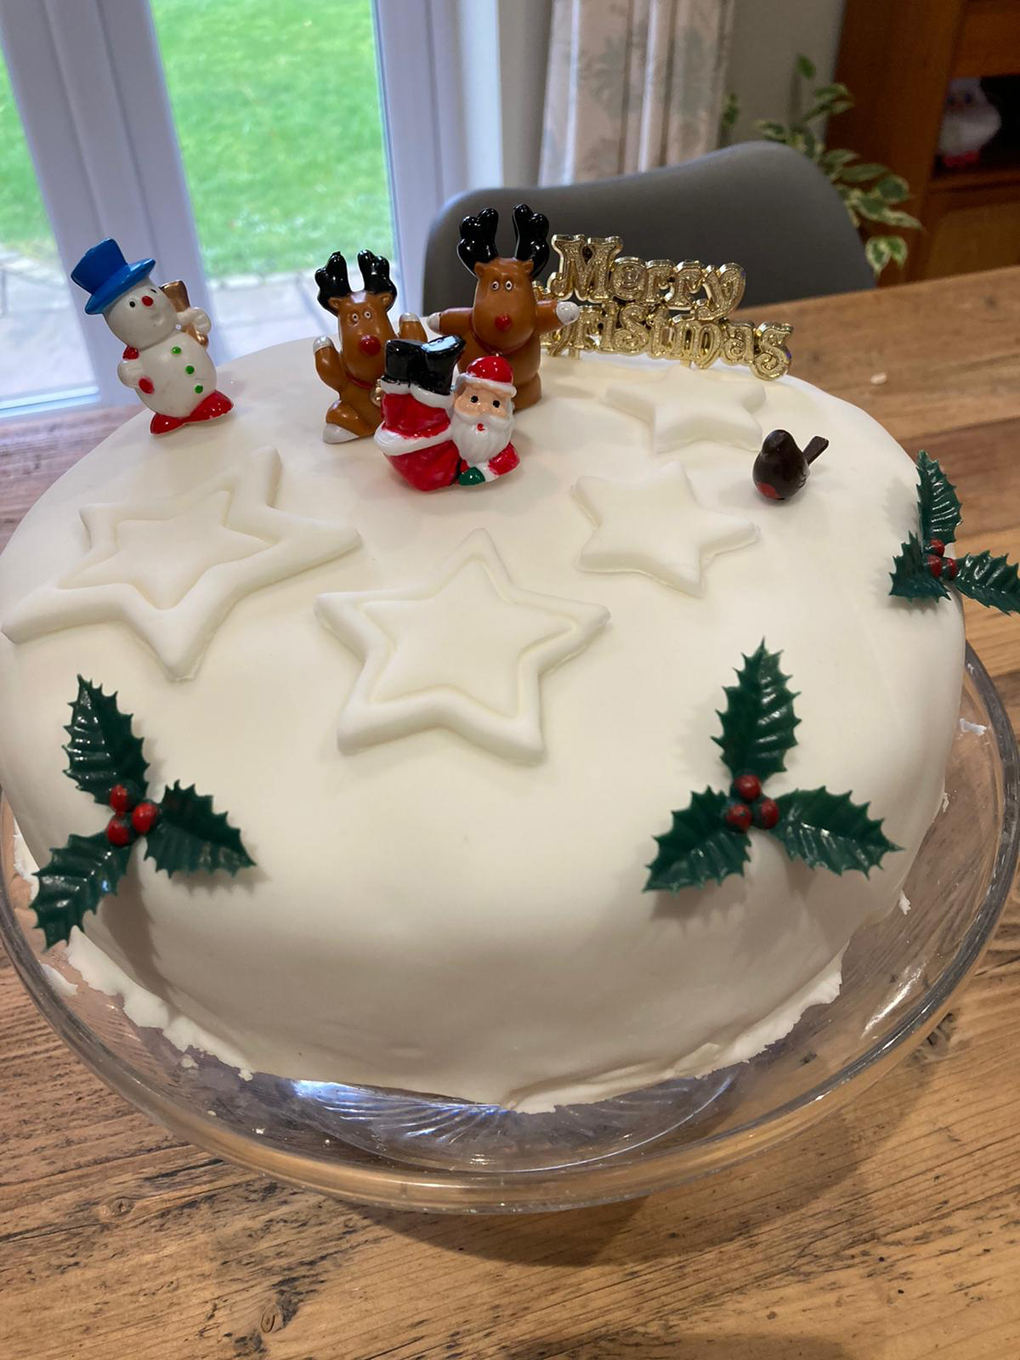 A model of Santa lounging happily on top of a Christmas cake